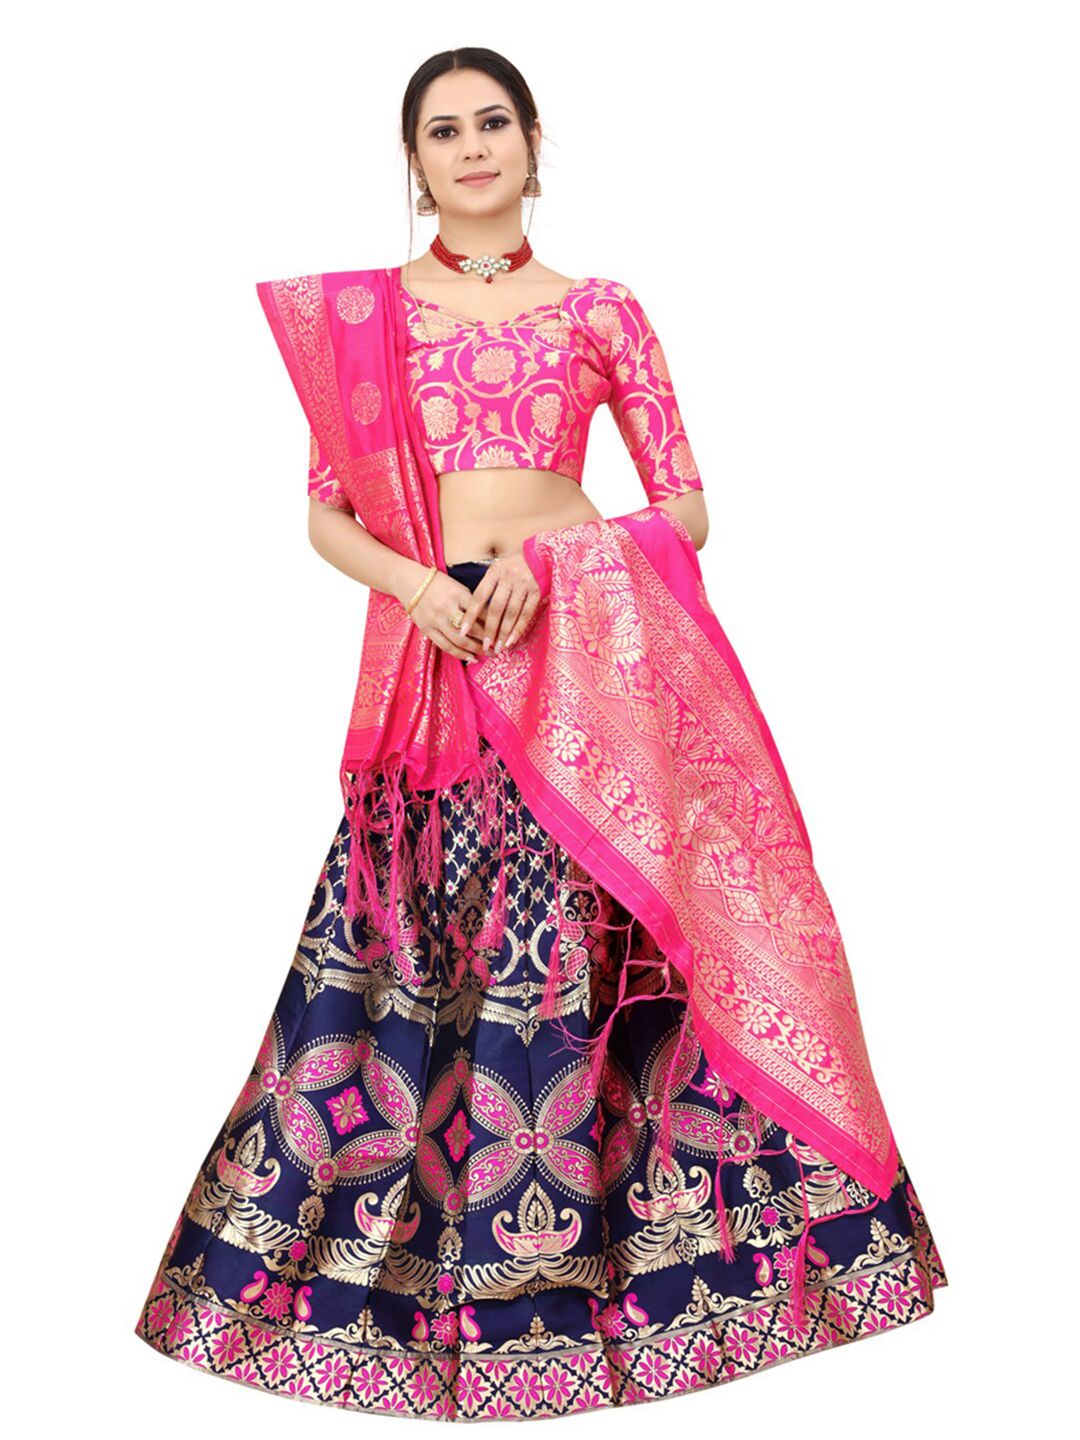 Xenilla Blue & Pink Embroidered Semi-Stitched Lehenga & Blouse With Dupatta Price in India